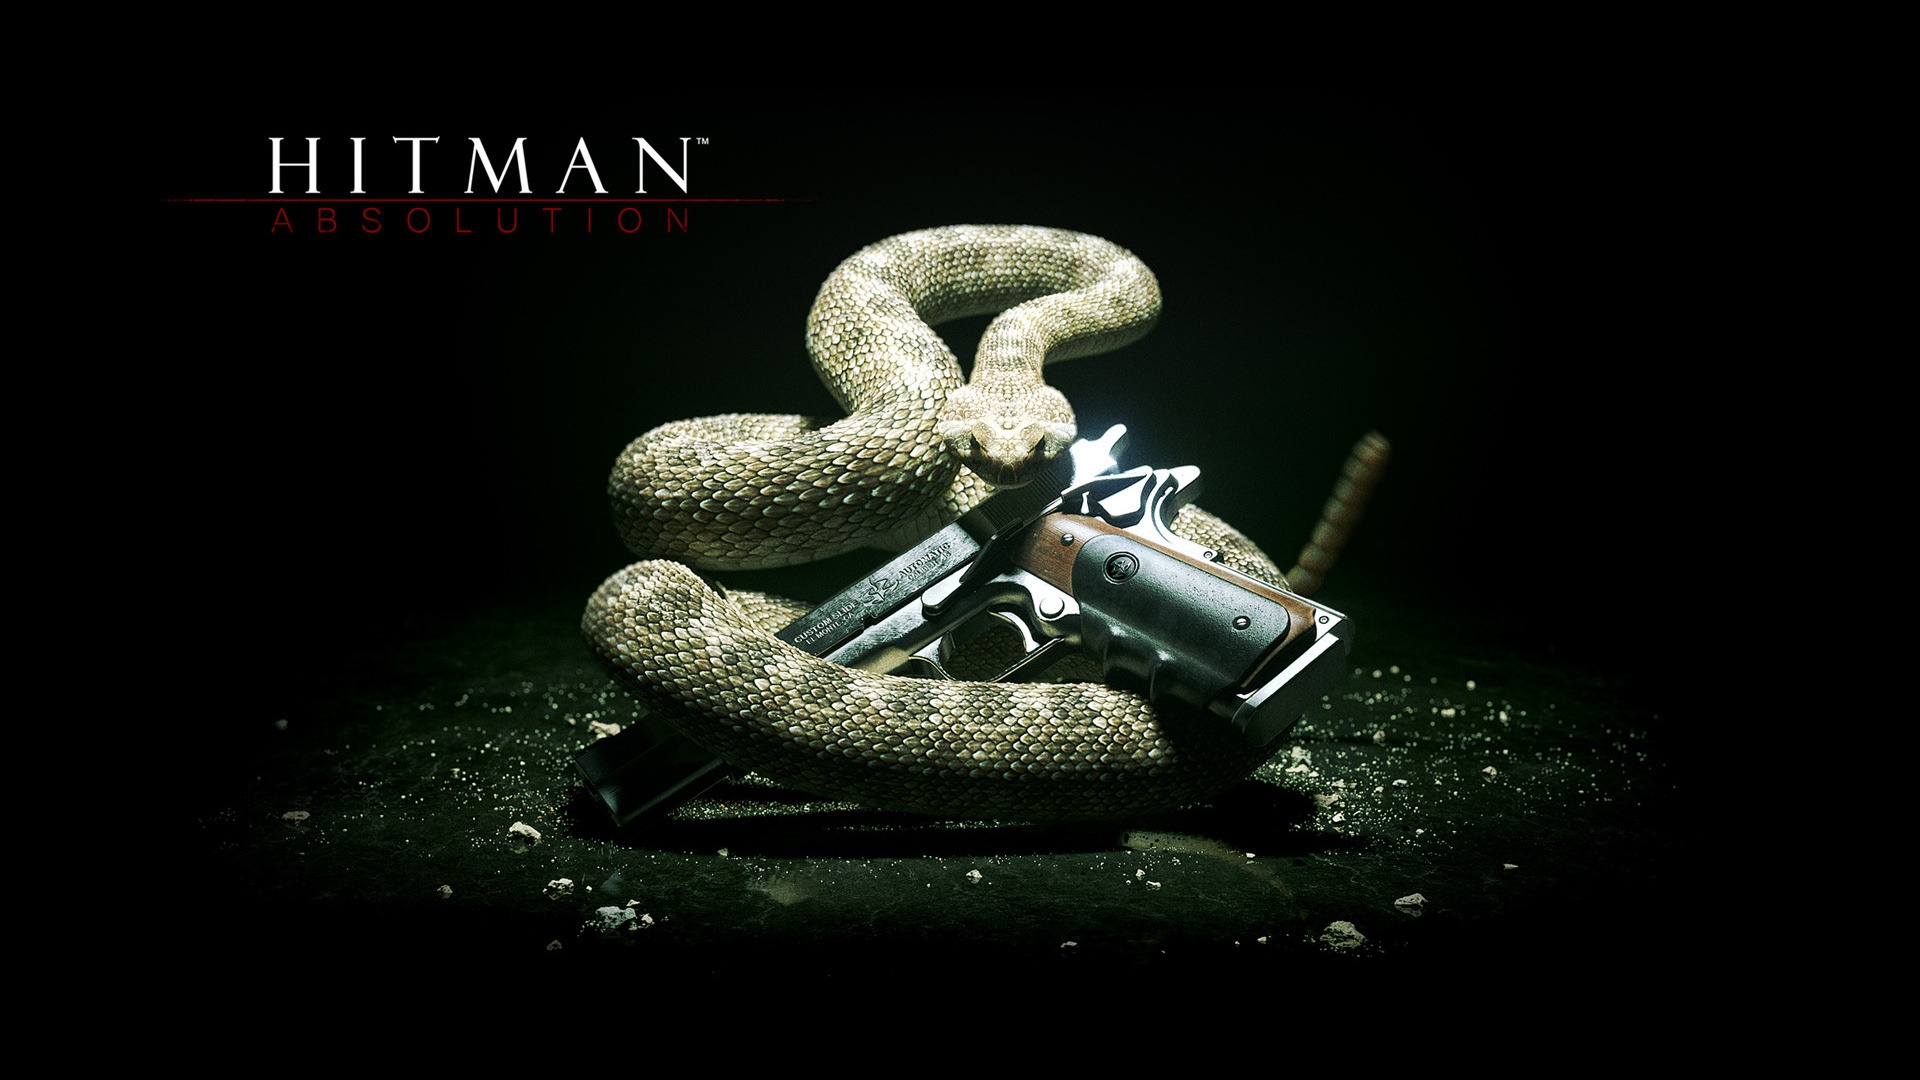 Hitman Absolution Game for 1920 x 1080 HDTV 1080p resolution